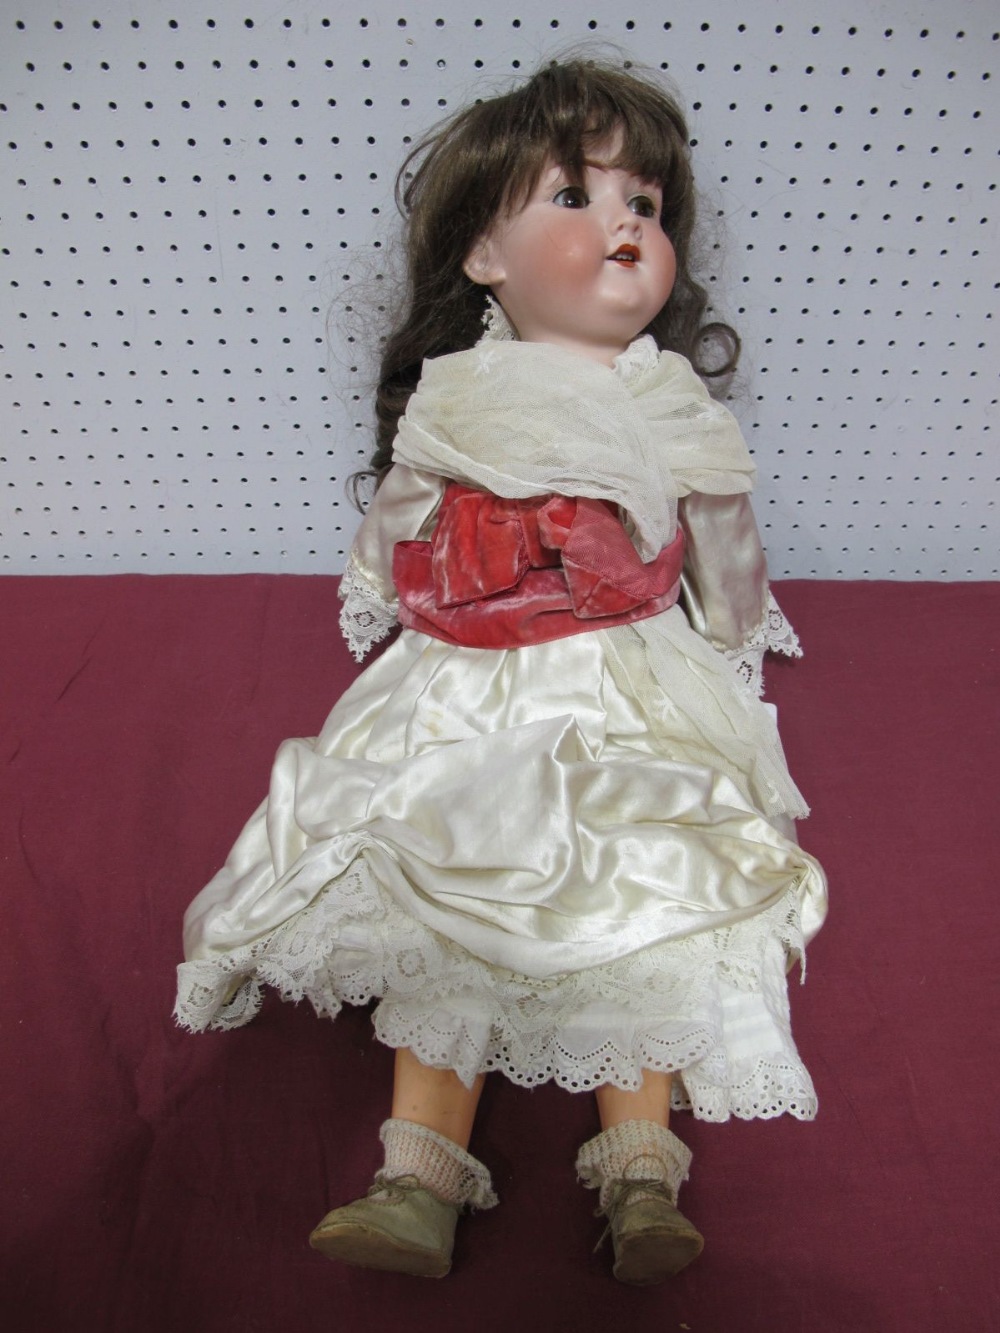 An Early XX Century Bisque Headed Doll by Armand Marseilles of Germany, head stamped 390 A8 M. Fixed